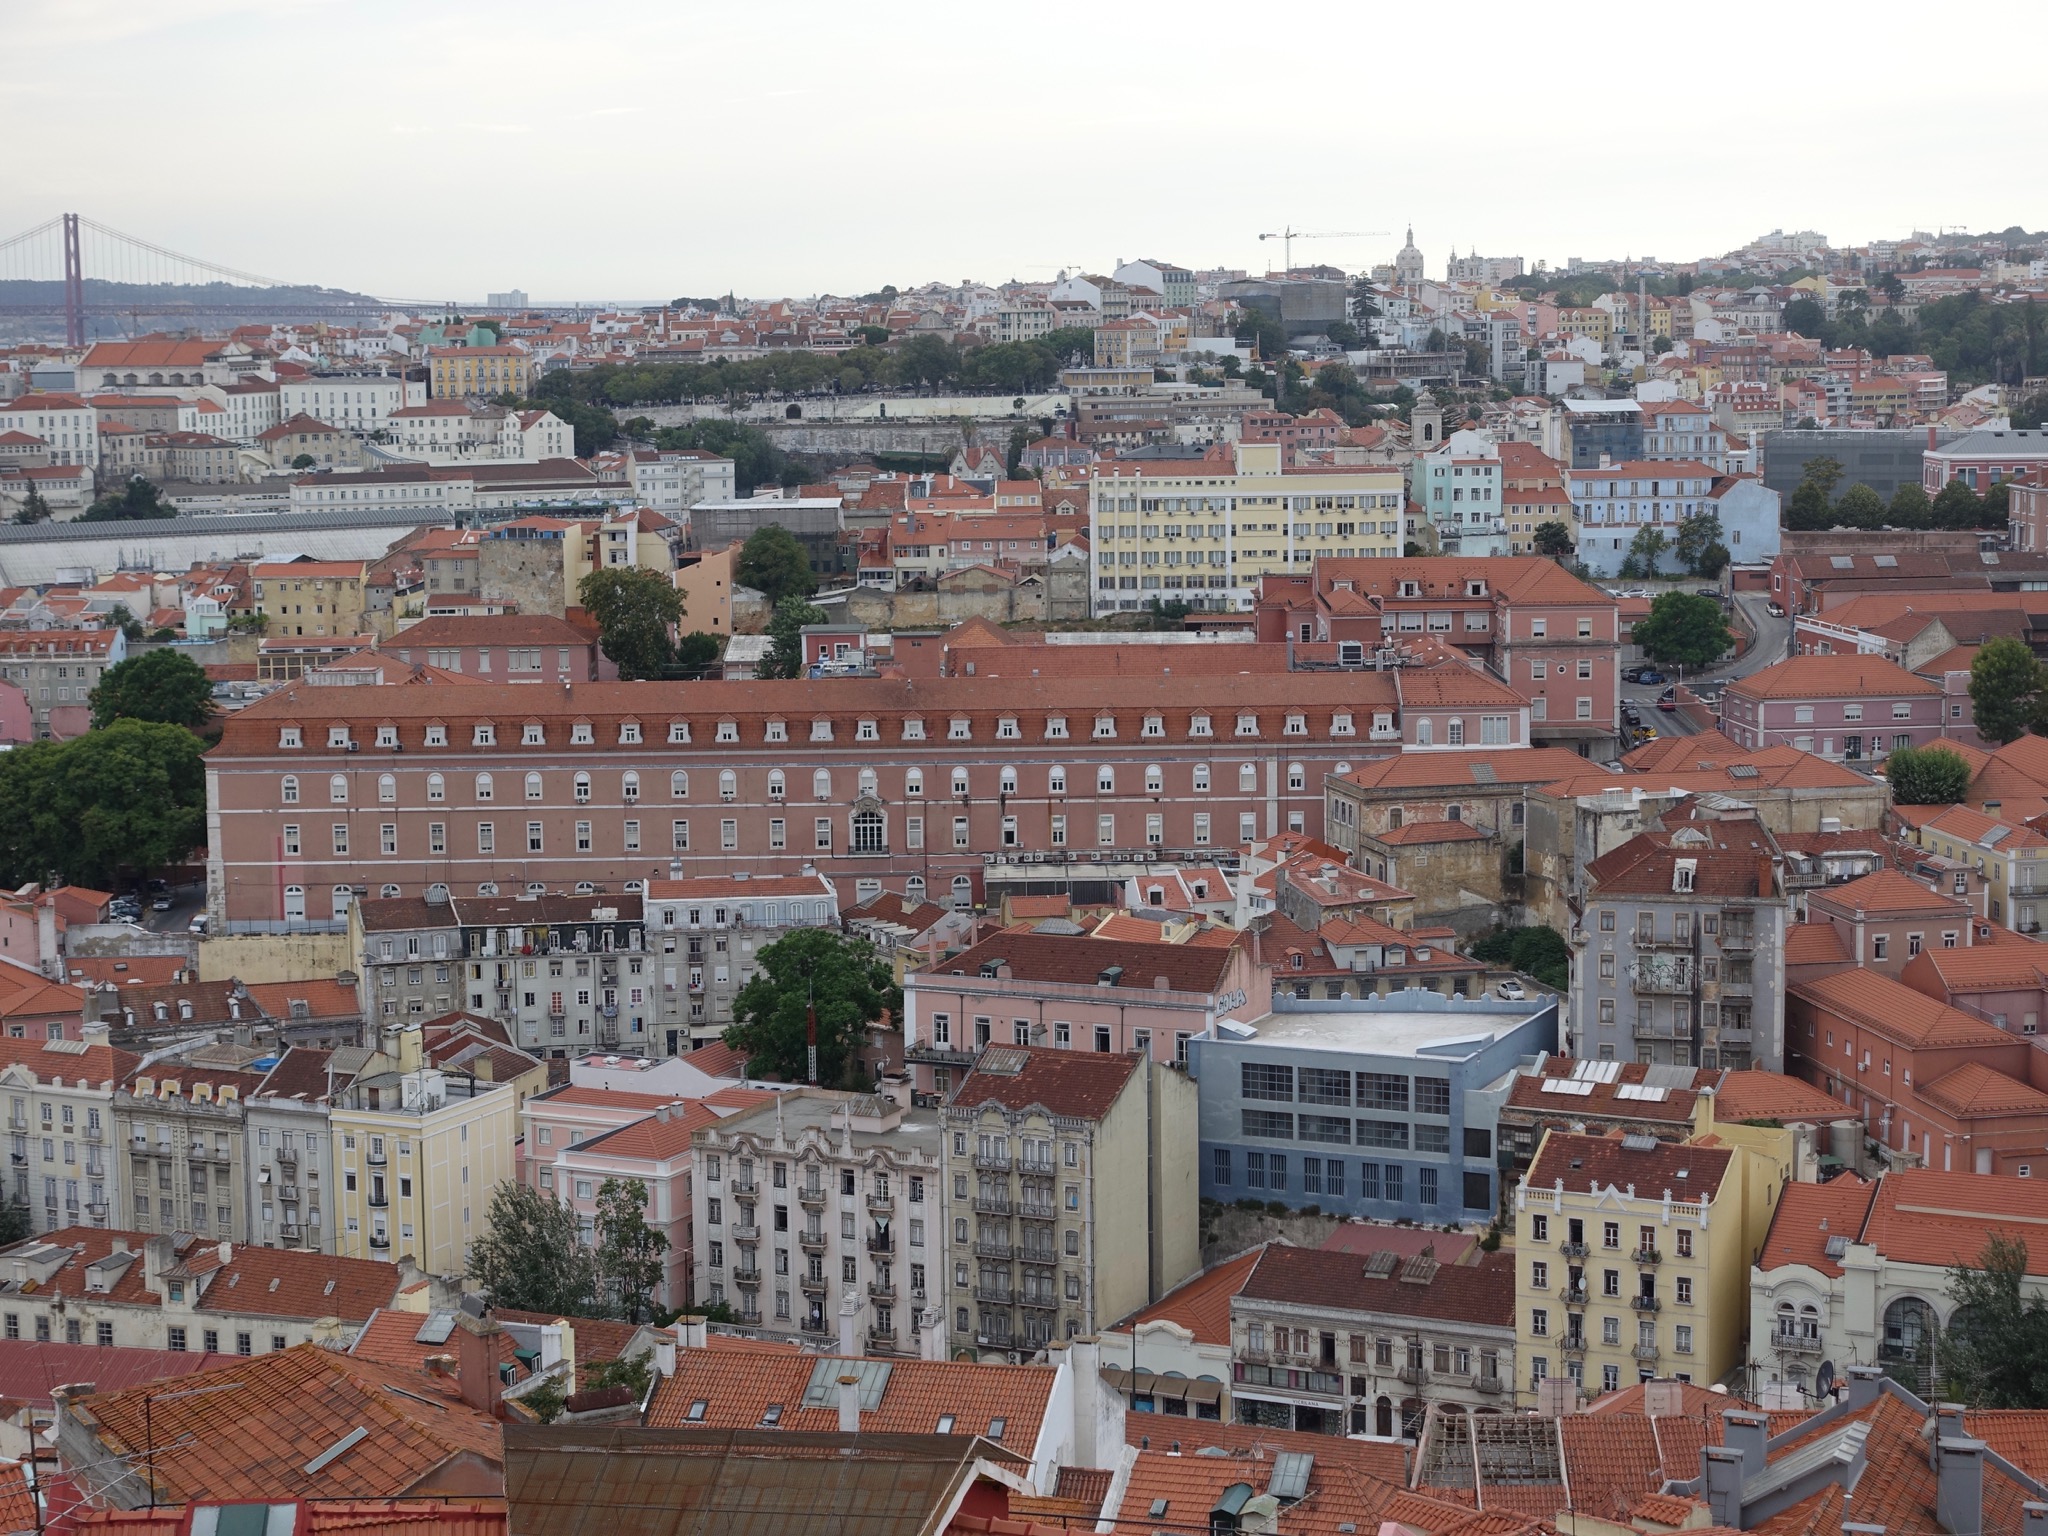 Photo 9 of 86 from the album Highlights Lisbon 2015.